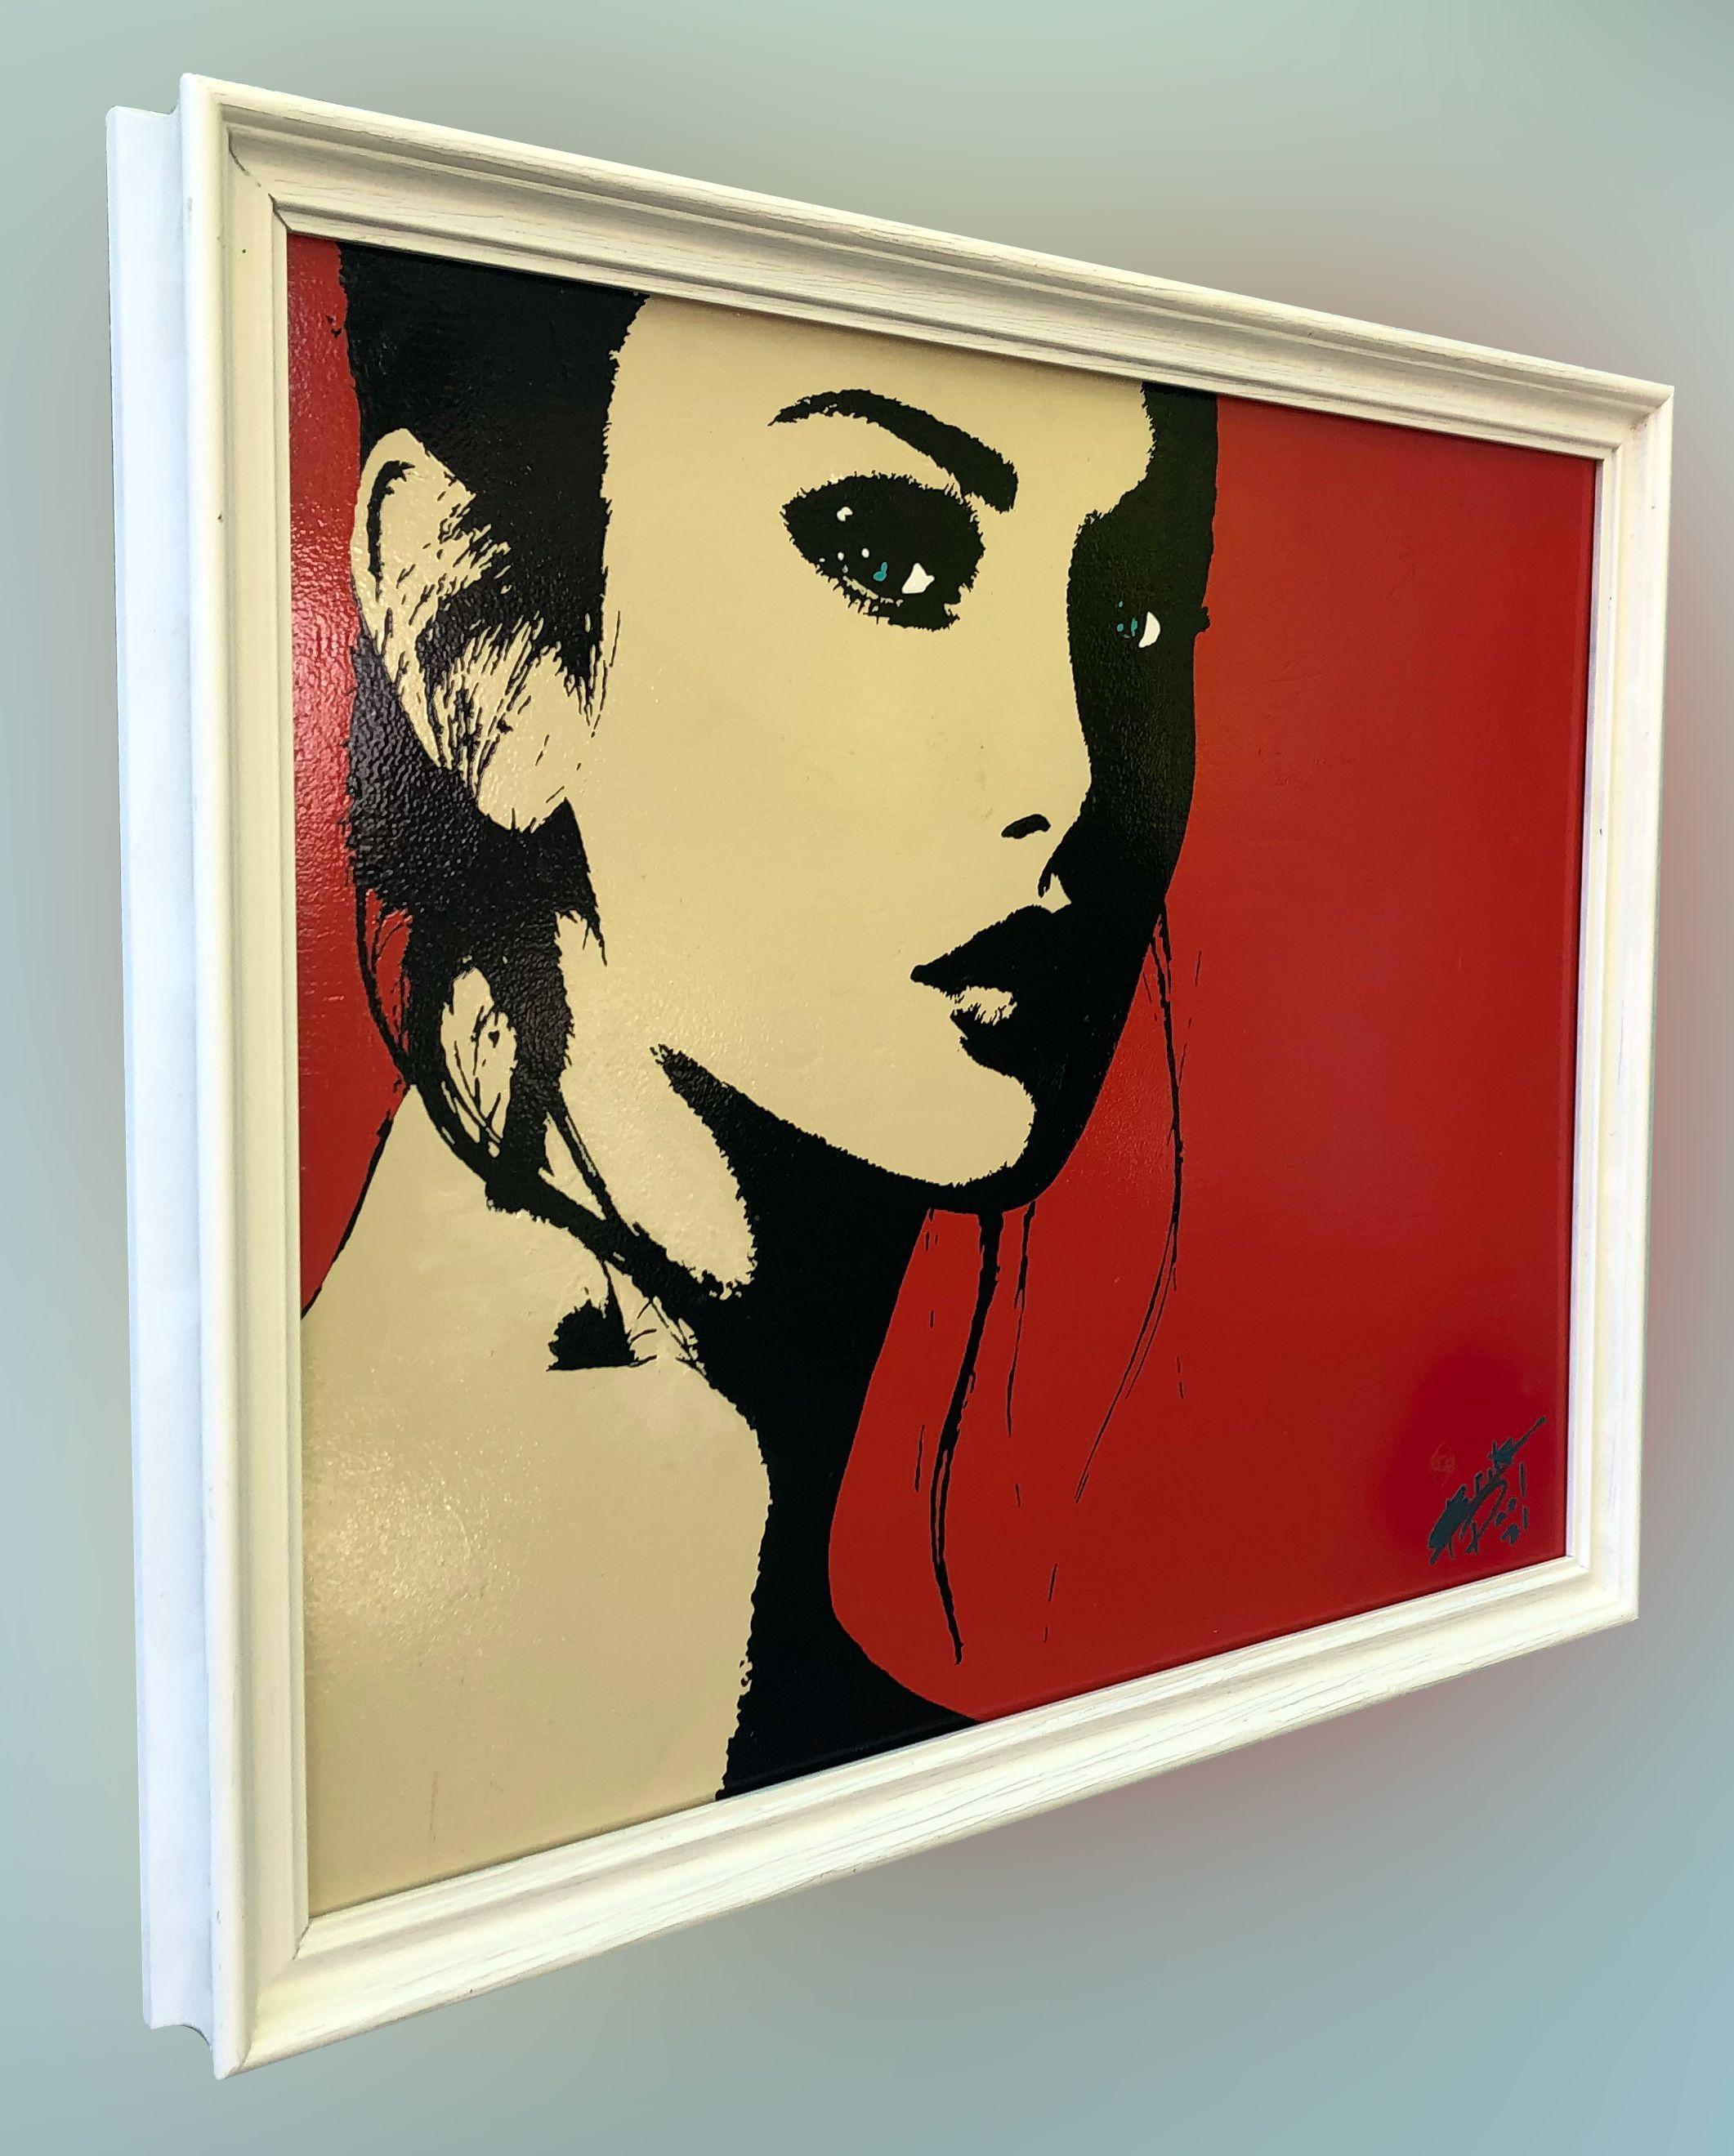 Taking reclaimed wood and making something striking is kind of my thing. I love rescuing materials and repurposing them to give people enjoyment. In the piece, I used my stencil technique to convey a curiosity of a young woman. Is anyone looking at